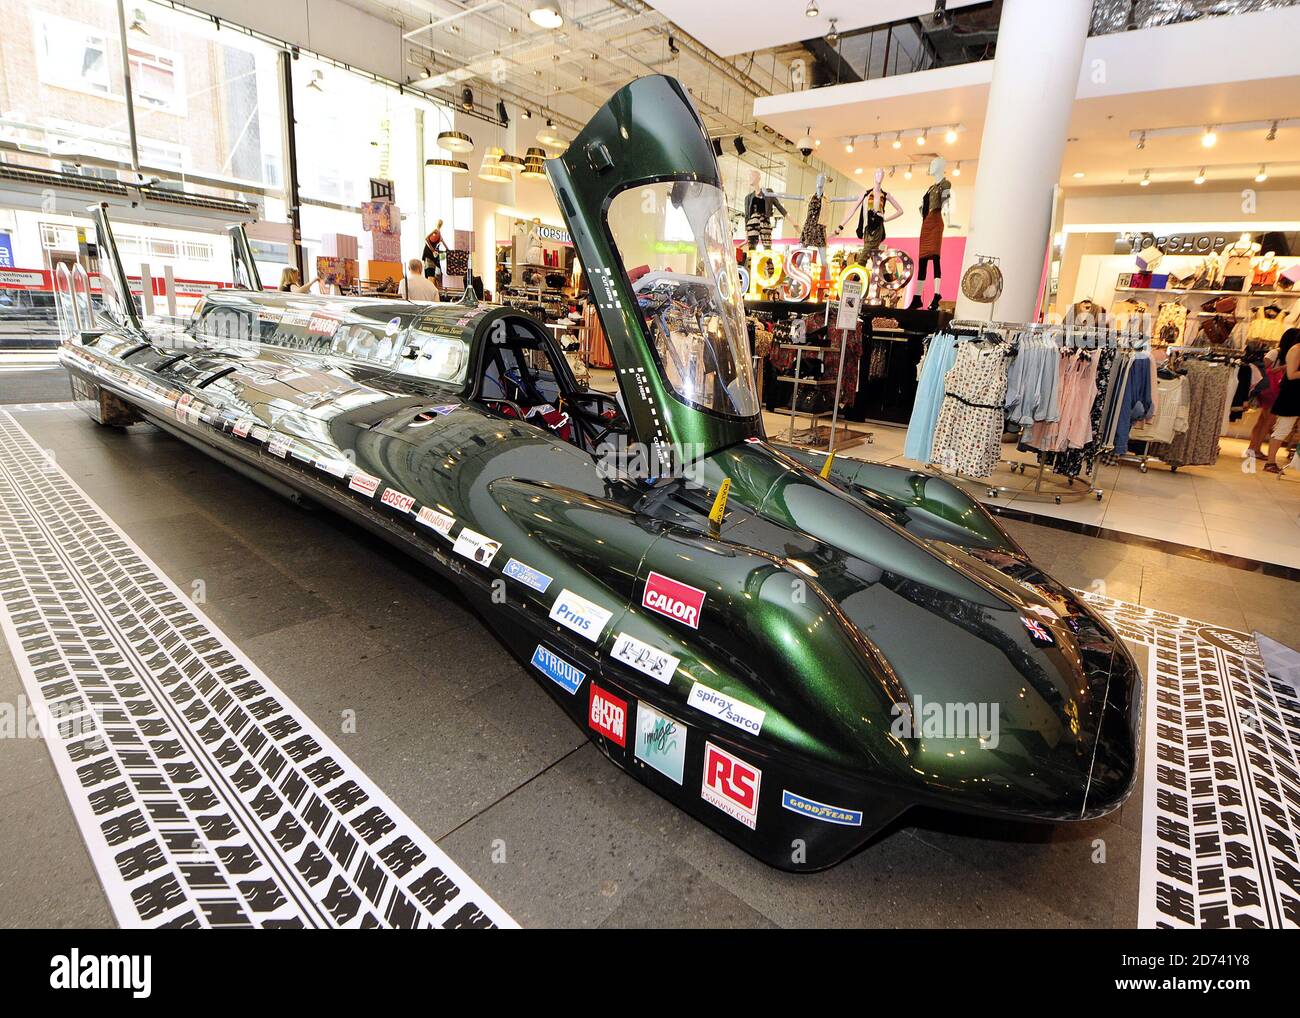 The British Steam Car on display in Selfridge's store in central London. The car broke the land speed record for a steam-powered vehicle, reaching 139 mph in August 2009, and will be on display at Selfridge's all week.  Stock Photo